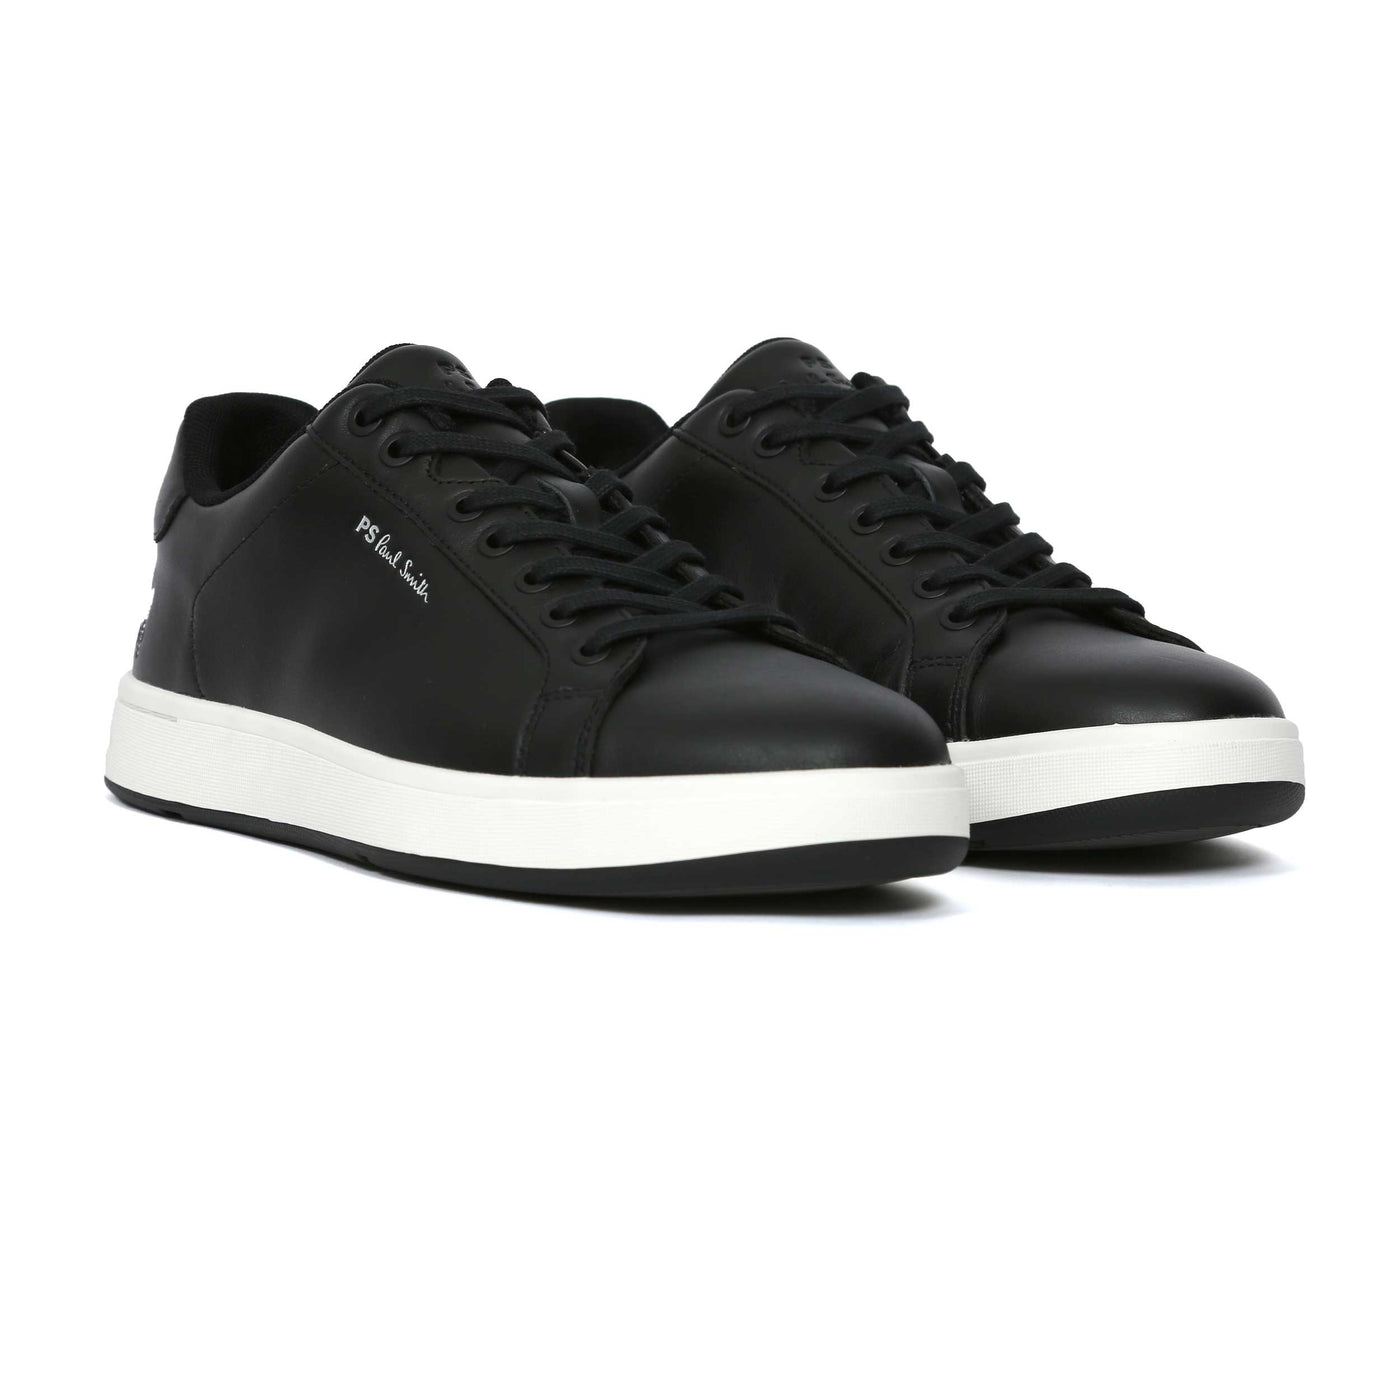 Paul Smith Albany Trainer in Black Pair